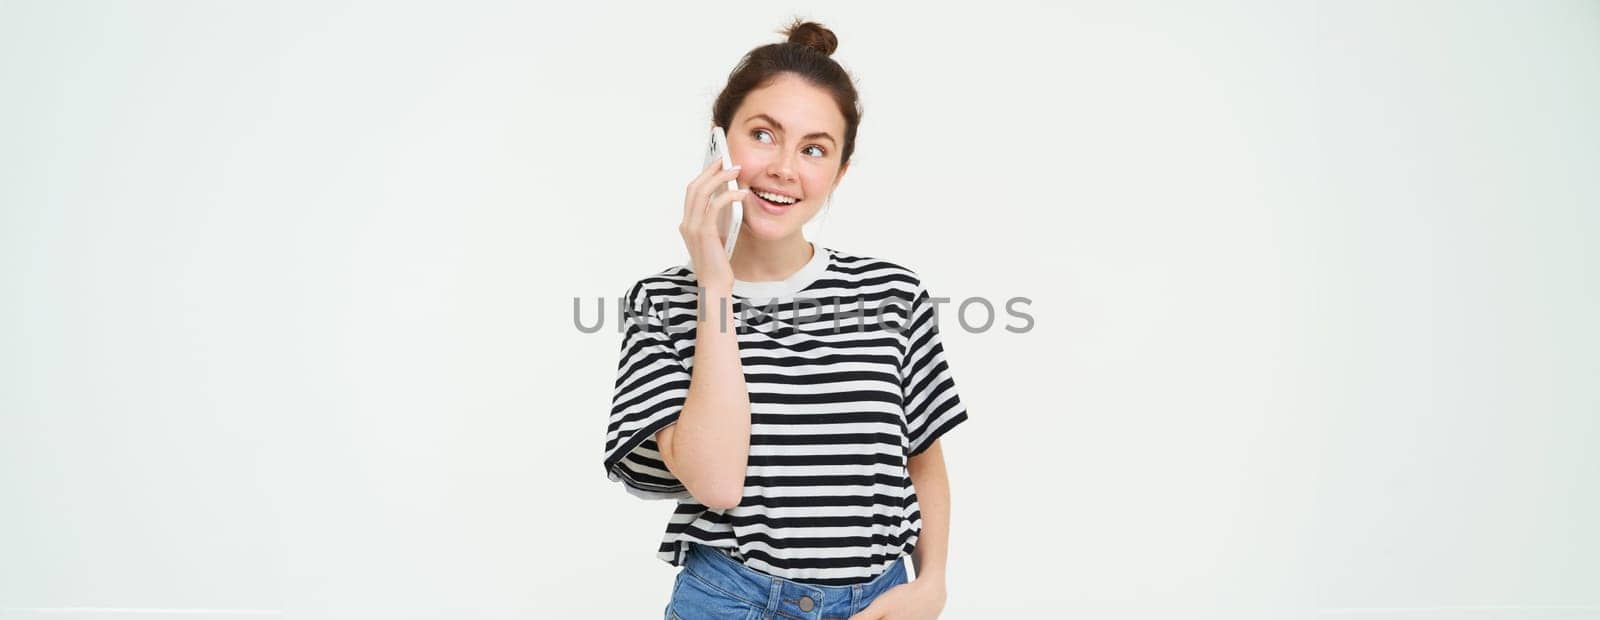 Happy young woman talks on mobile phone, chats on telephone, uses smartphone, stands over white background. Copy space